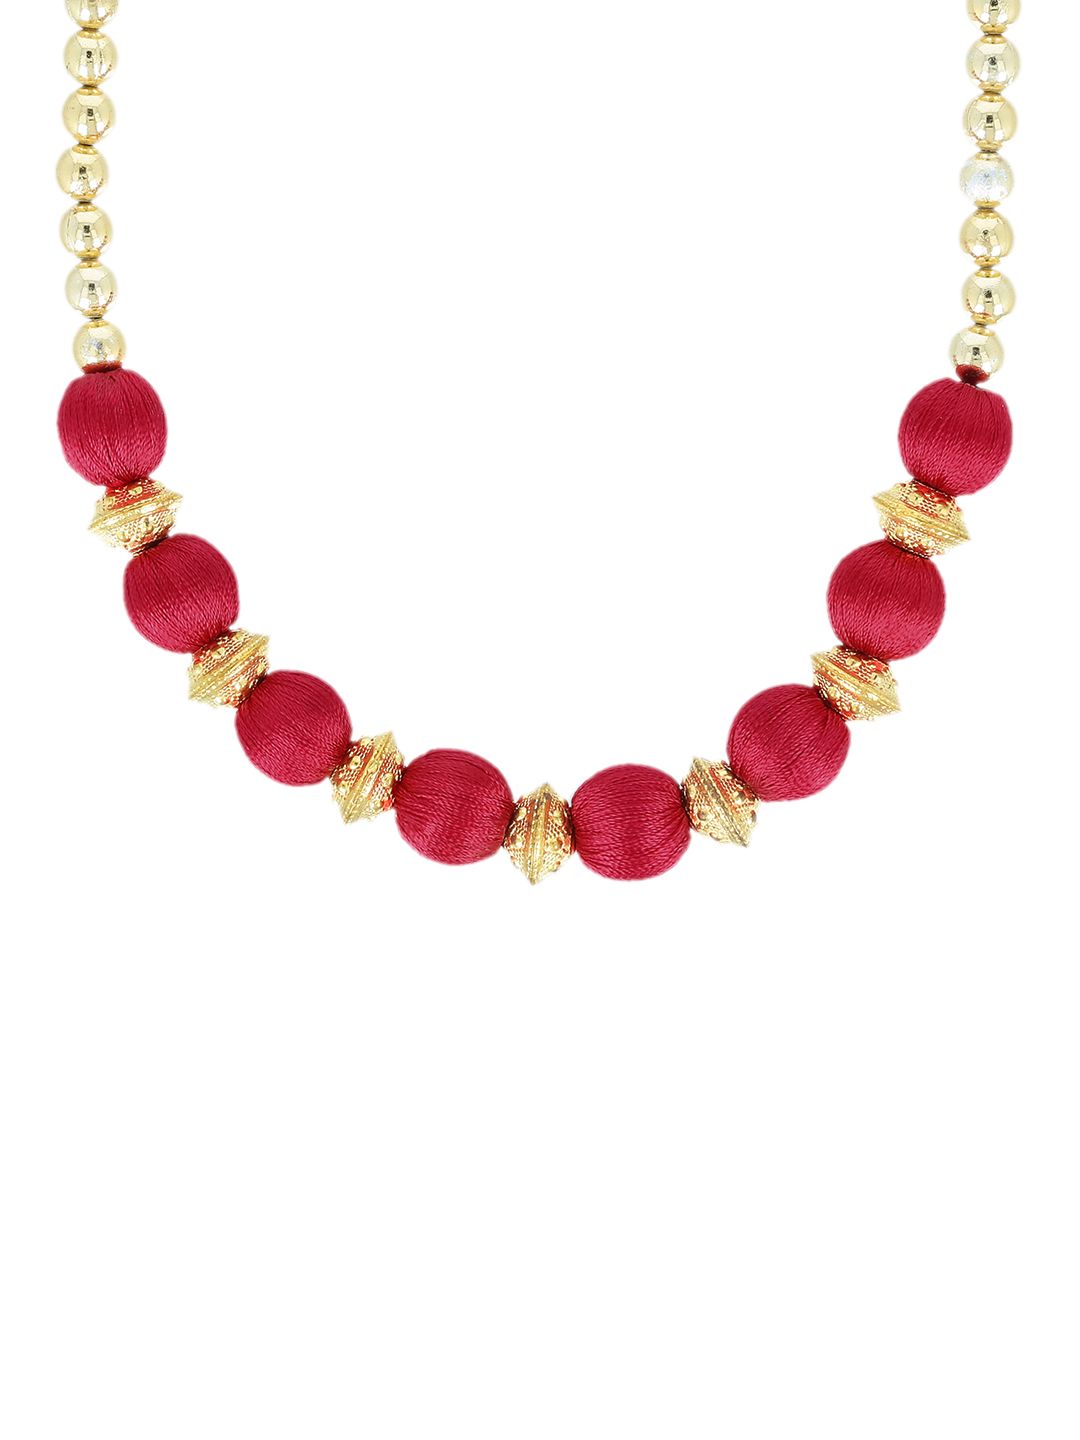 AKSHARA Gold-Toned & Red Handcrafted Beaded Necklace Price in India